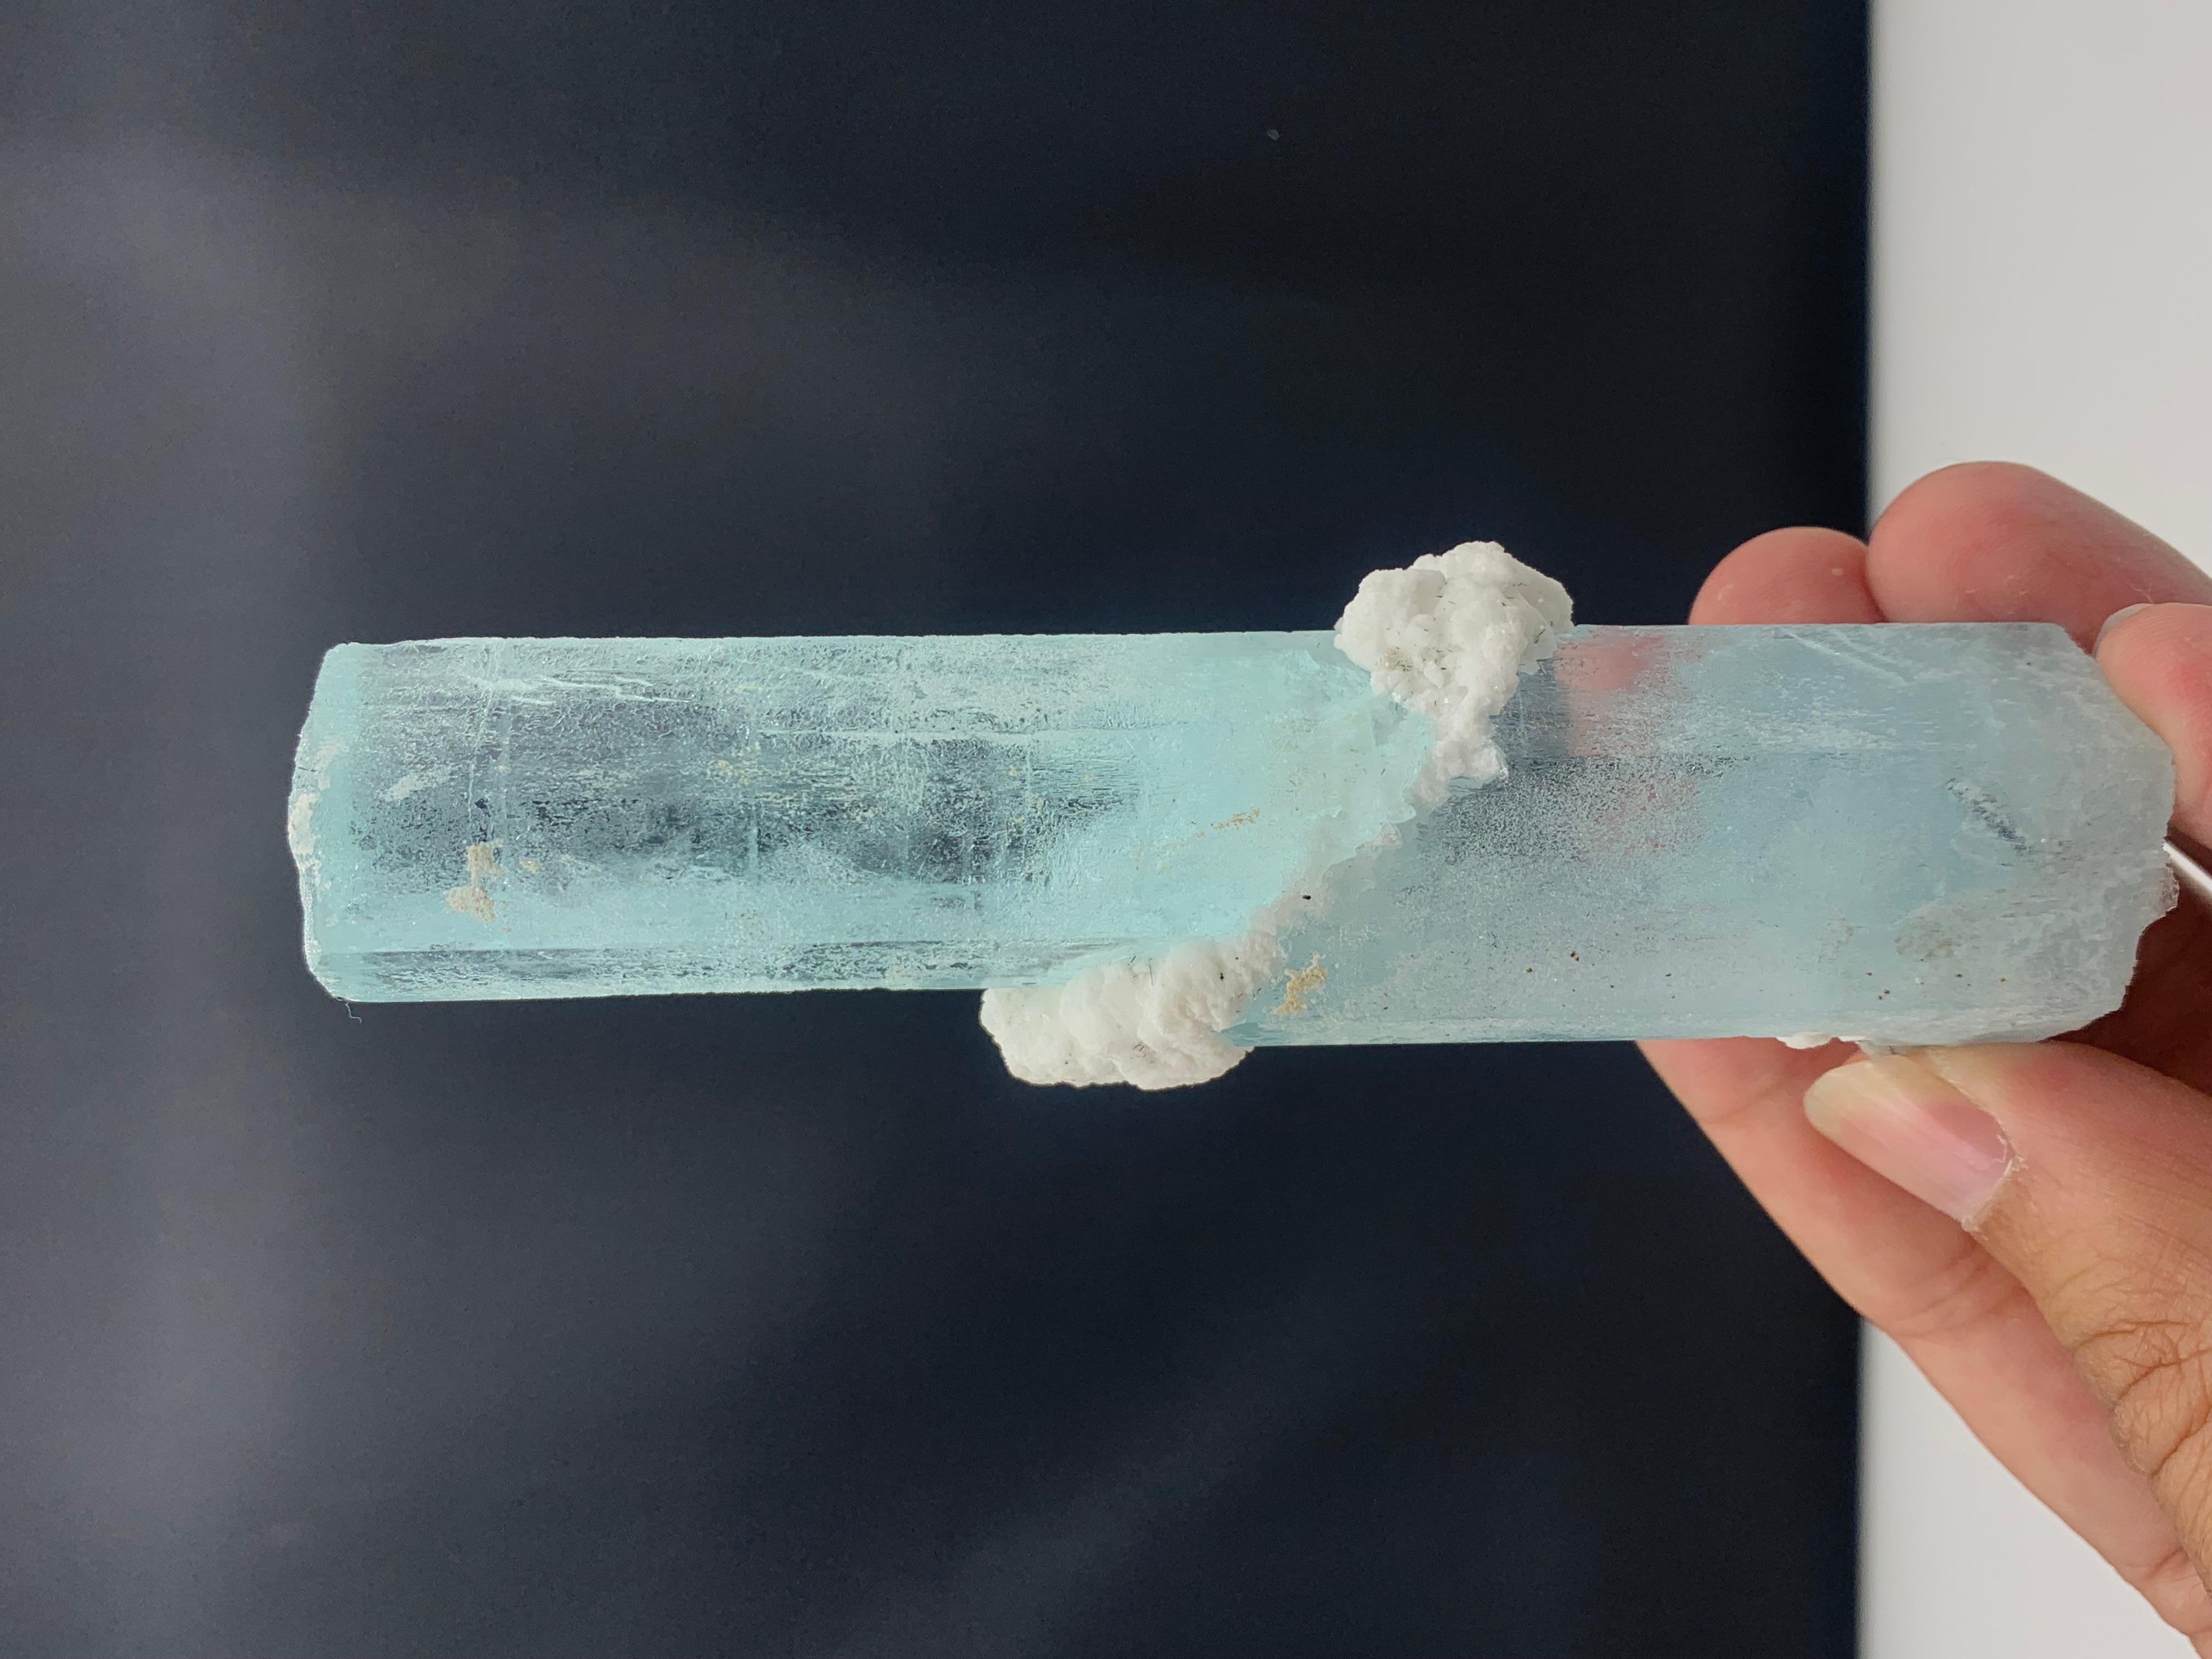 Incredible Natural Aquamarine Specimen From Nagar Valley, Pakistan
WEIGHT: 128 gram
DIMENSIONS: 11.8 x 2.8 x 2.5 Cm
ORIGIN: Nagar Valley, Gilgit Baltistan Pakistan 
TREATMENT: None
Aquamarine is a pale-blue to light-green variety of beryl. The